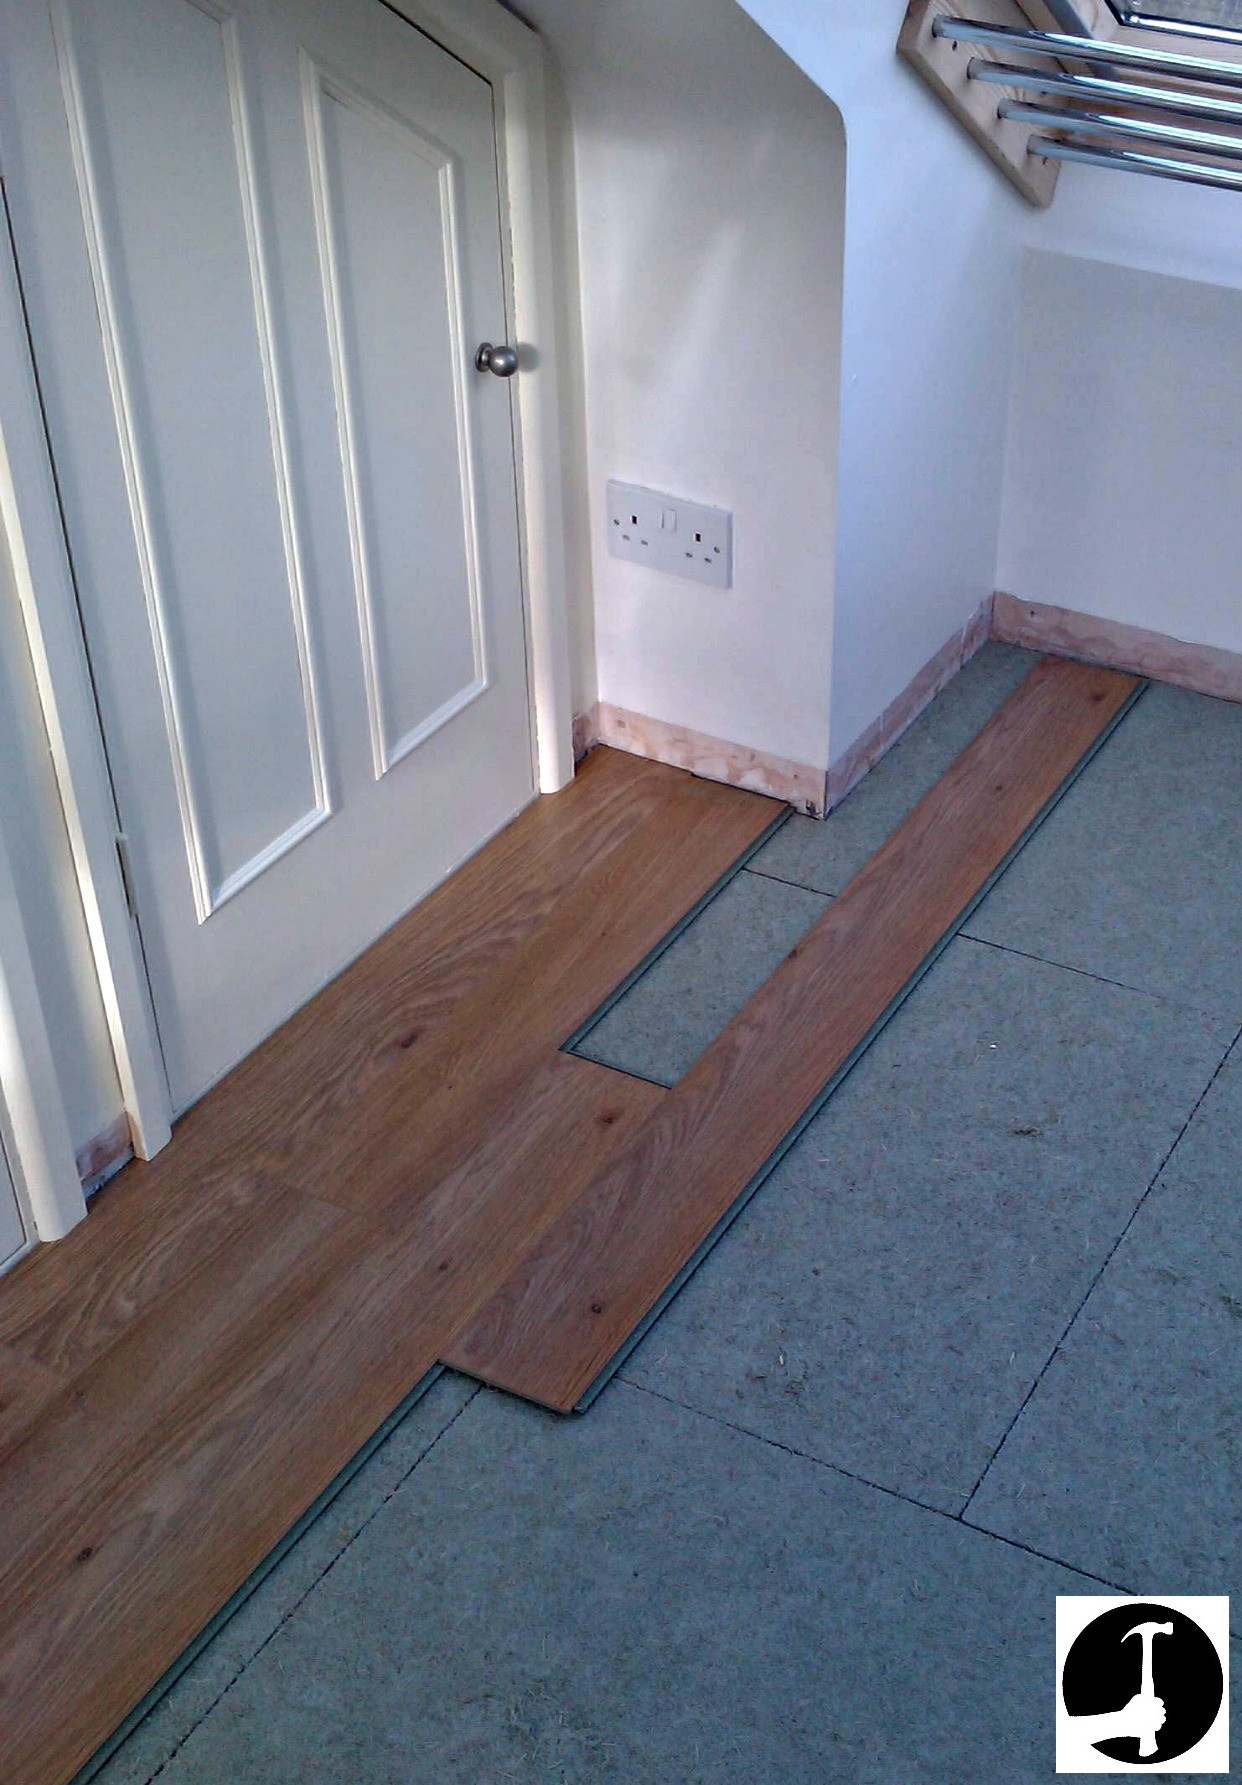 hardwood floor installation tips of how to install laminate flooring with ease glued glue less systems within setting out laminate flooring